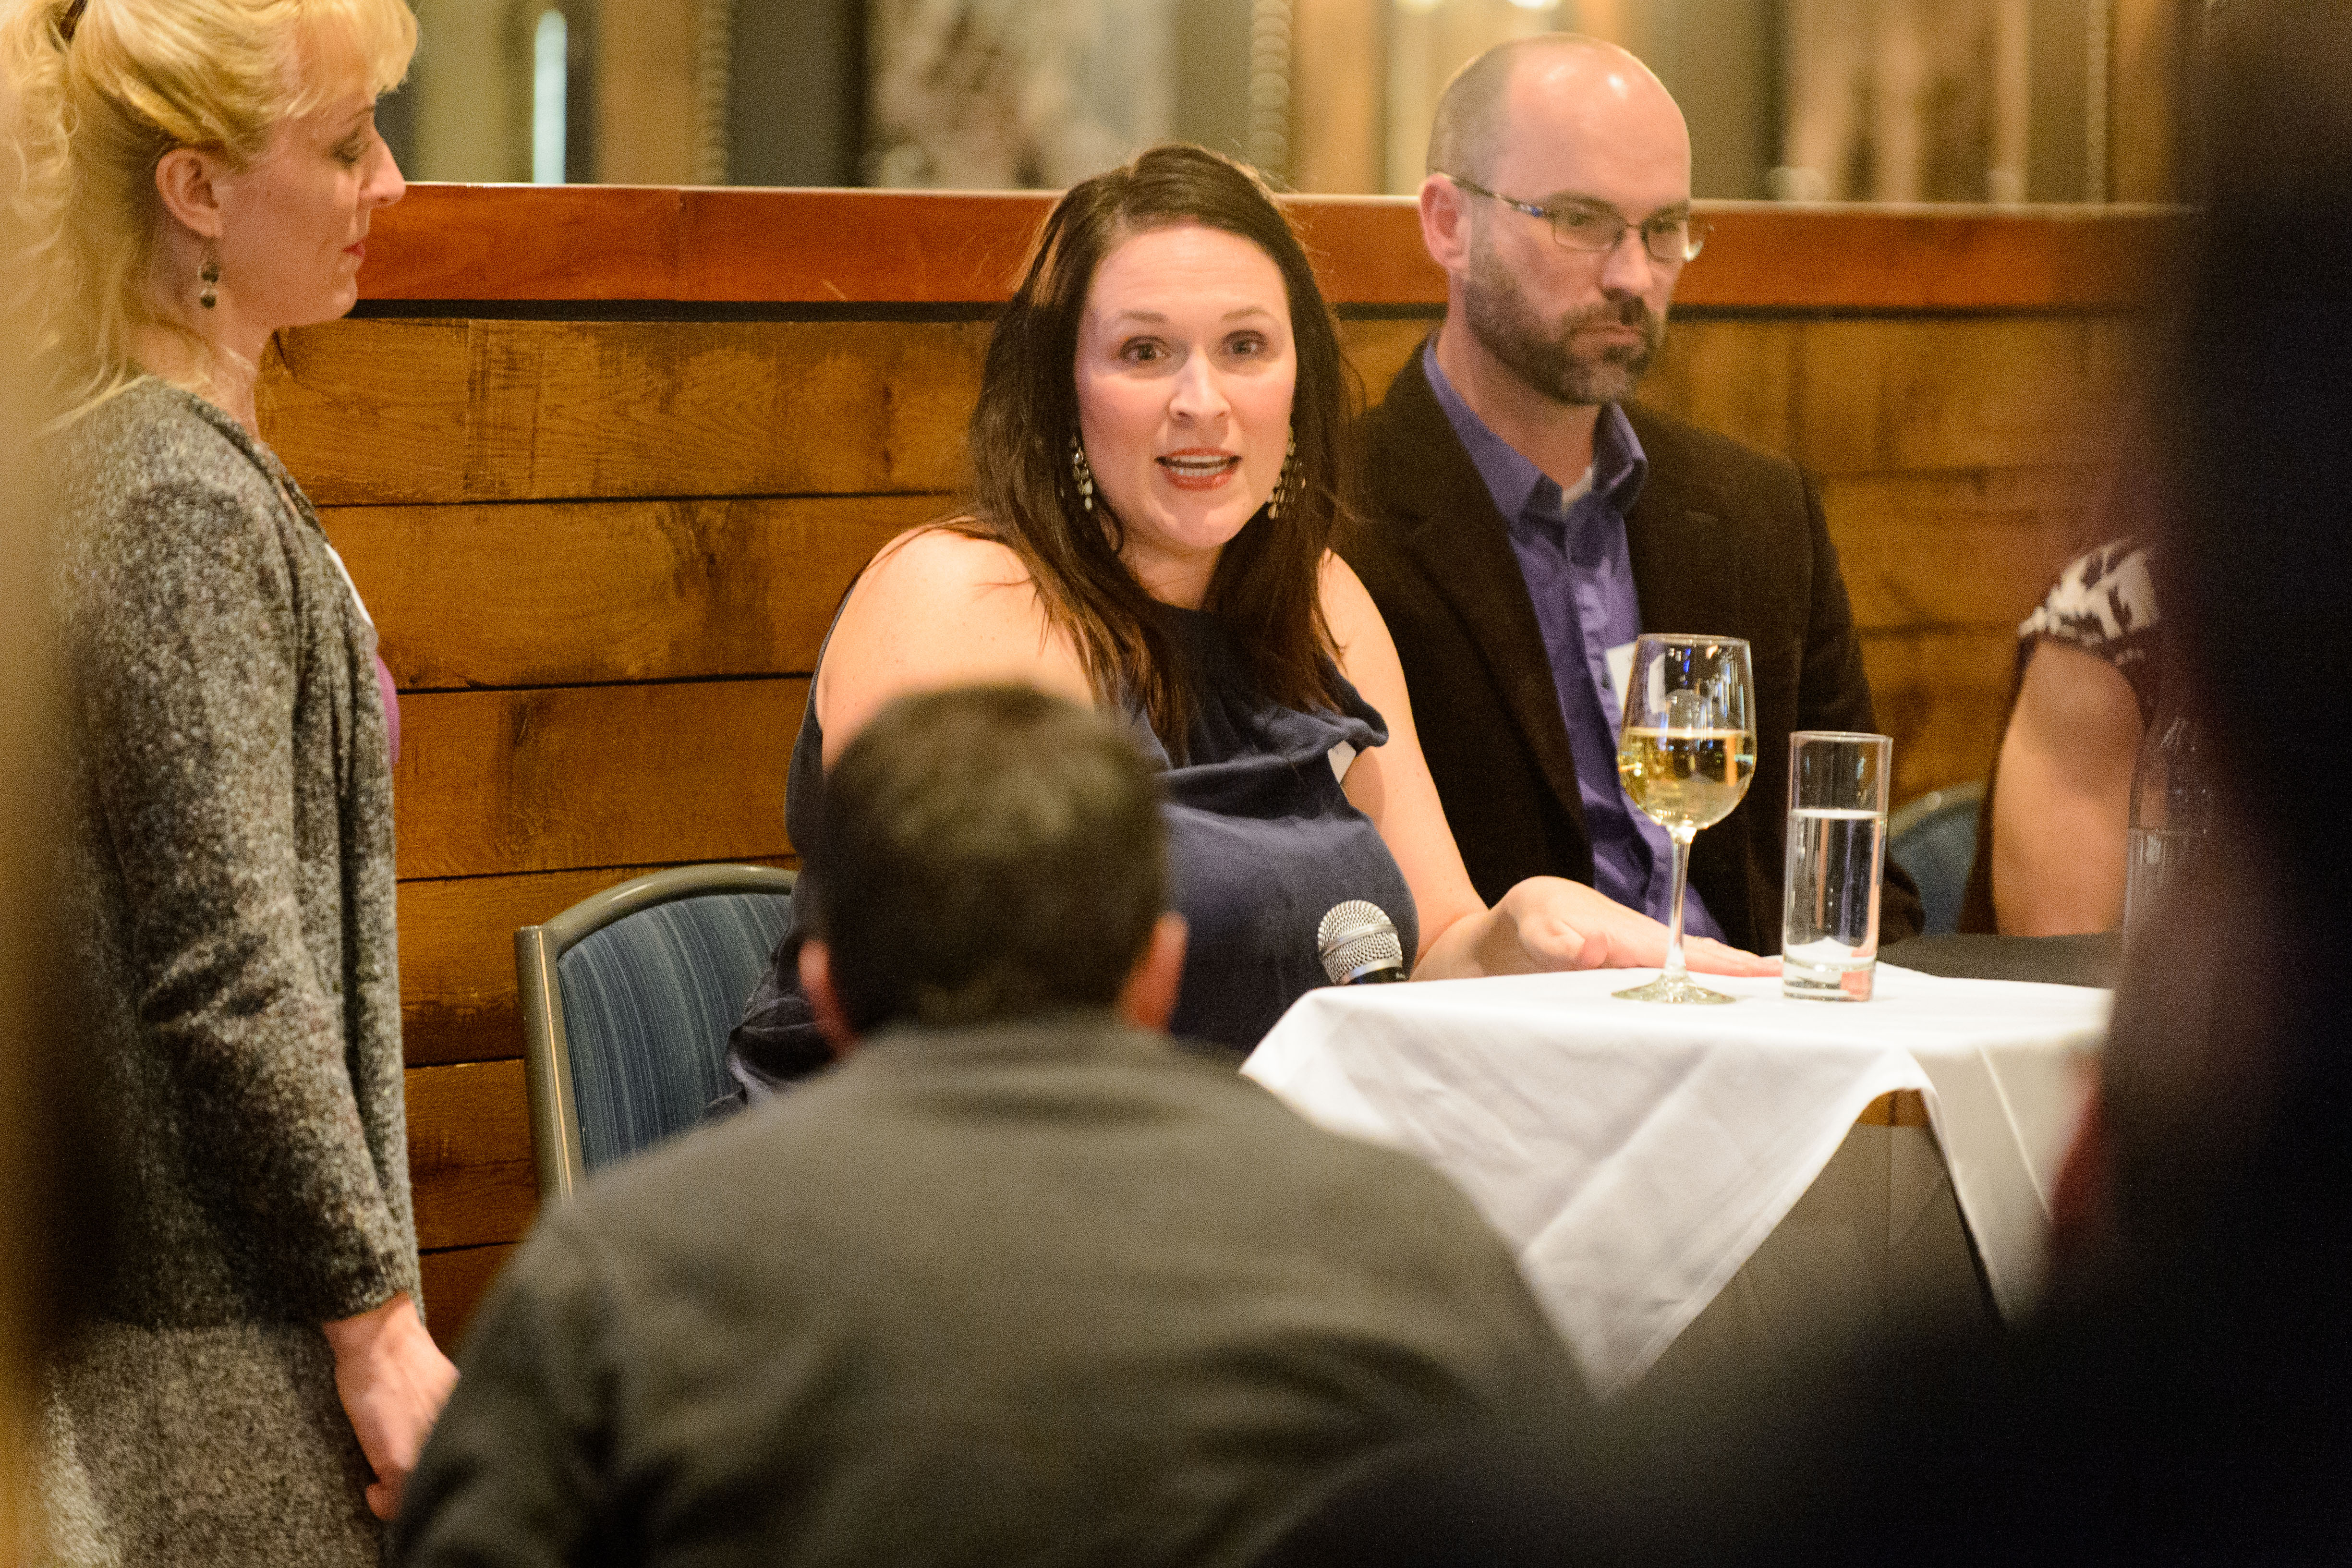 Erin Young, assistant professor of nursing, center, responds to a question during a UConn Science Salon on pain. Sittting at left is her husband and fellow pain researcher, assistant professor Kyle Baumbauer. (Peter Morenus/UConn File Photo)